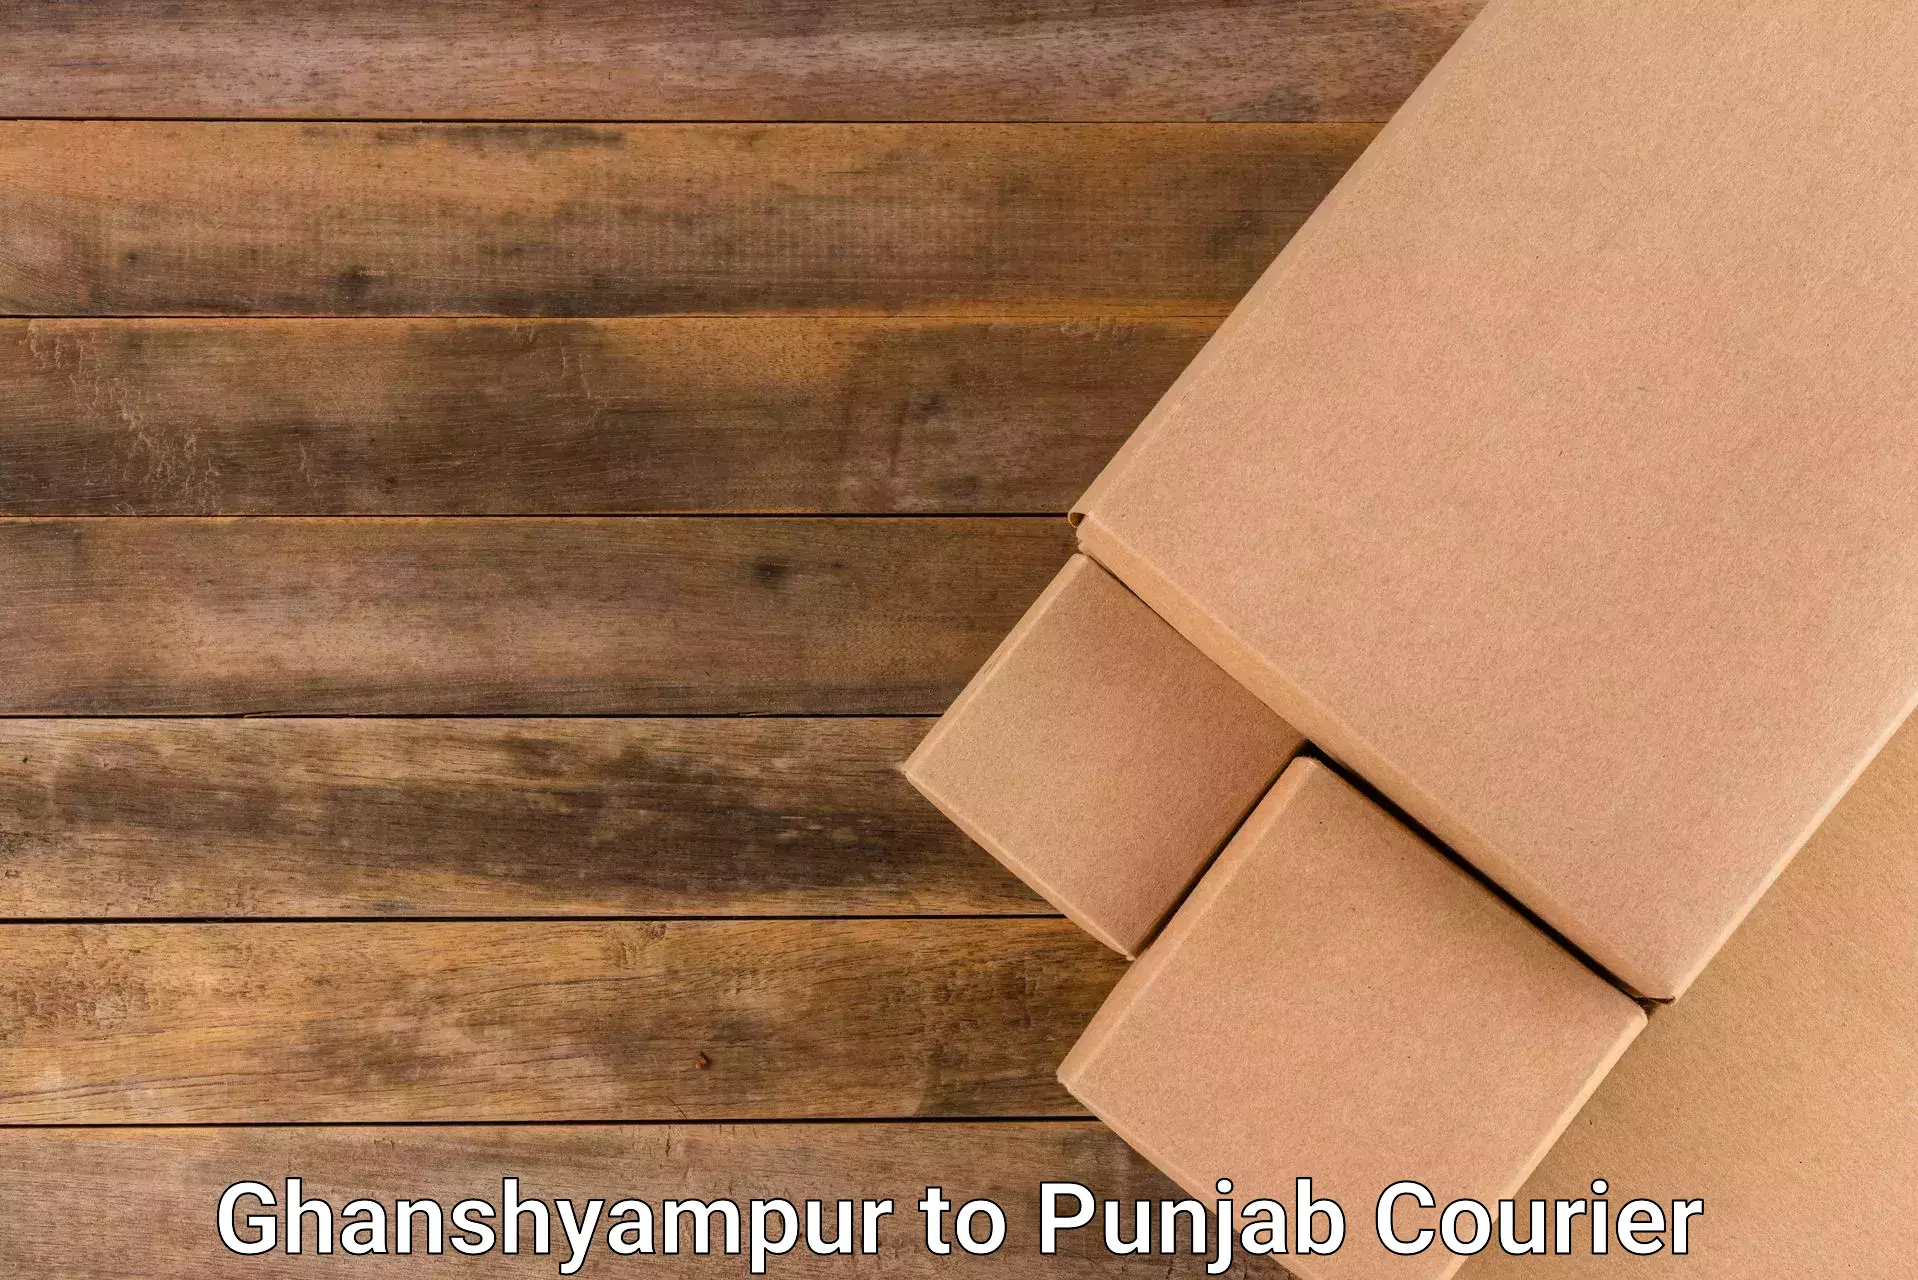 Cash on delivery service in Ghanshyampur to Punjab